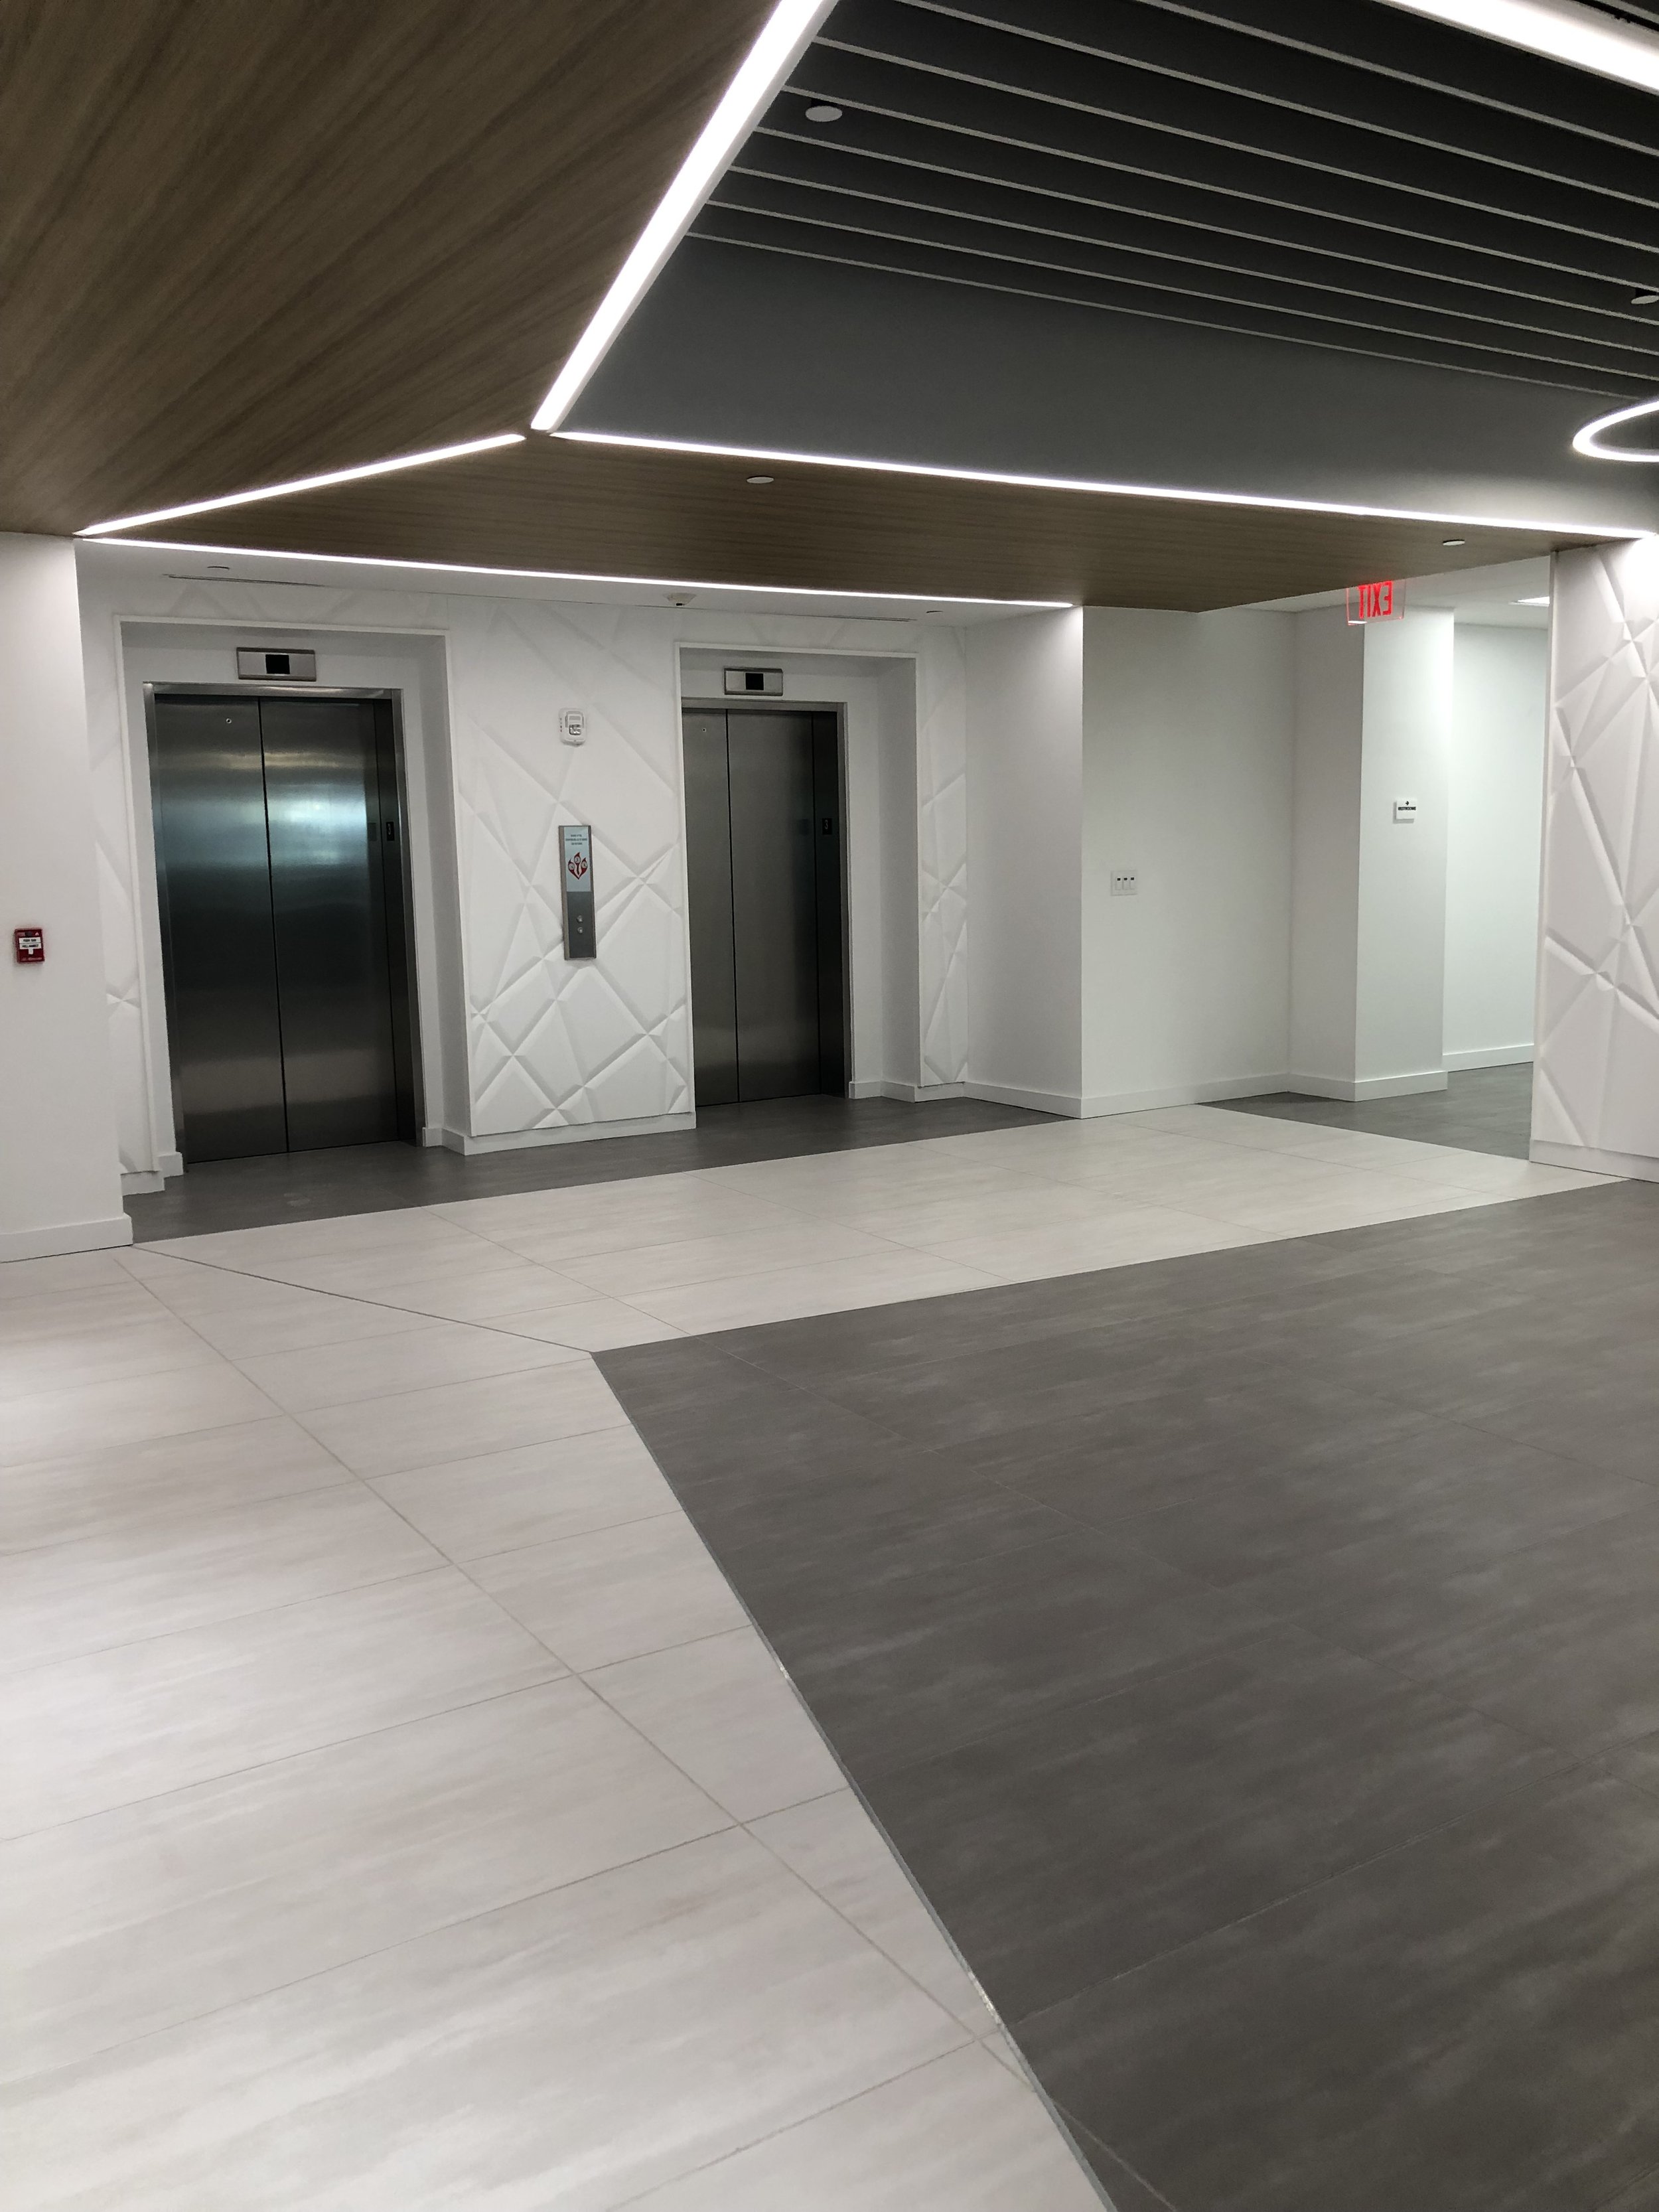 Another elevator area